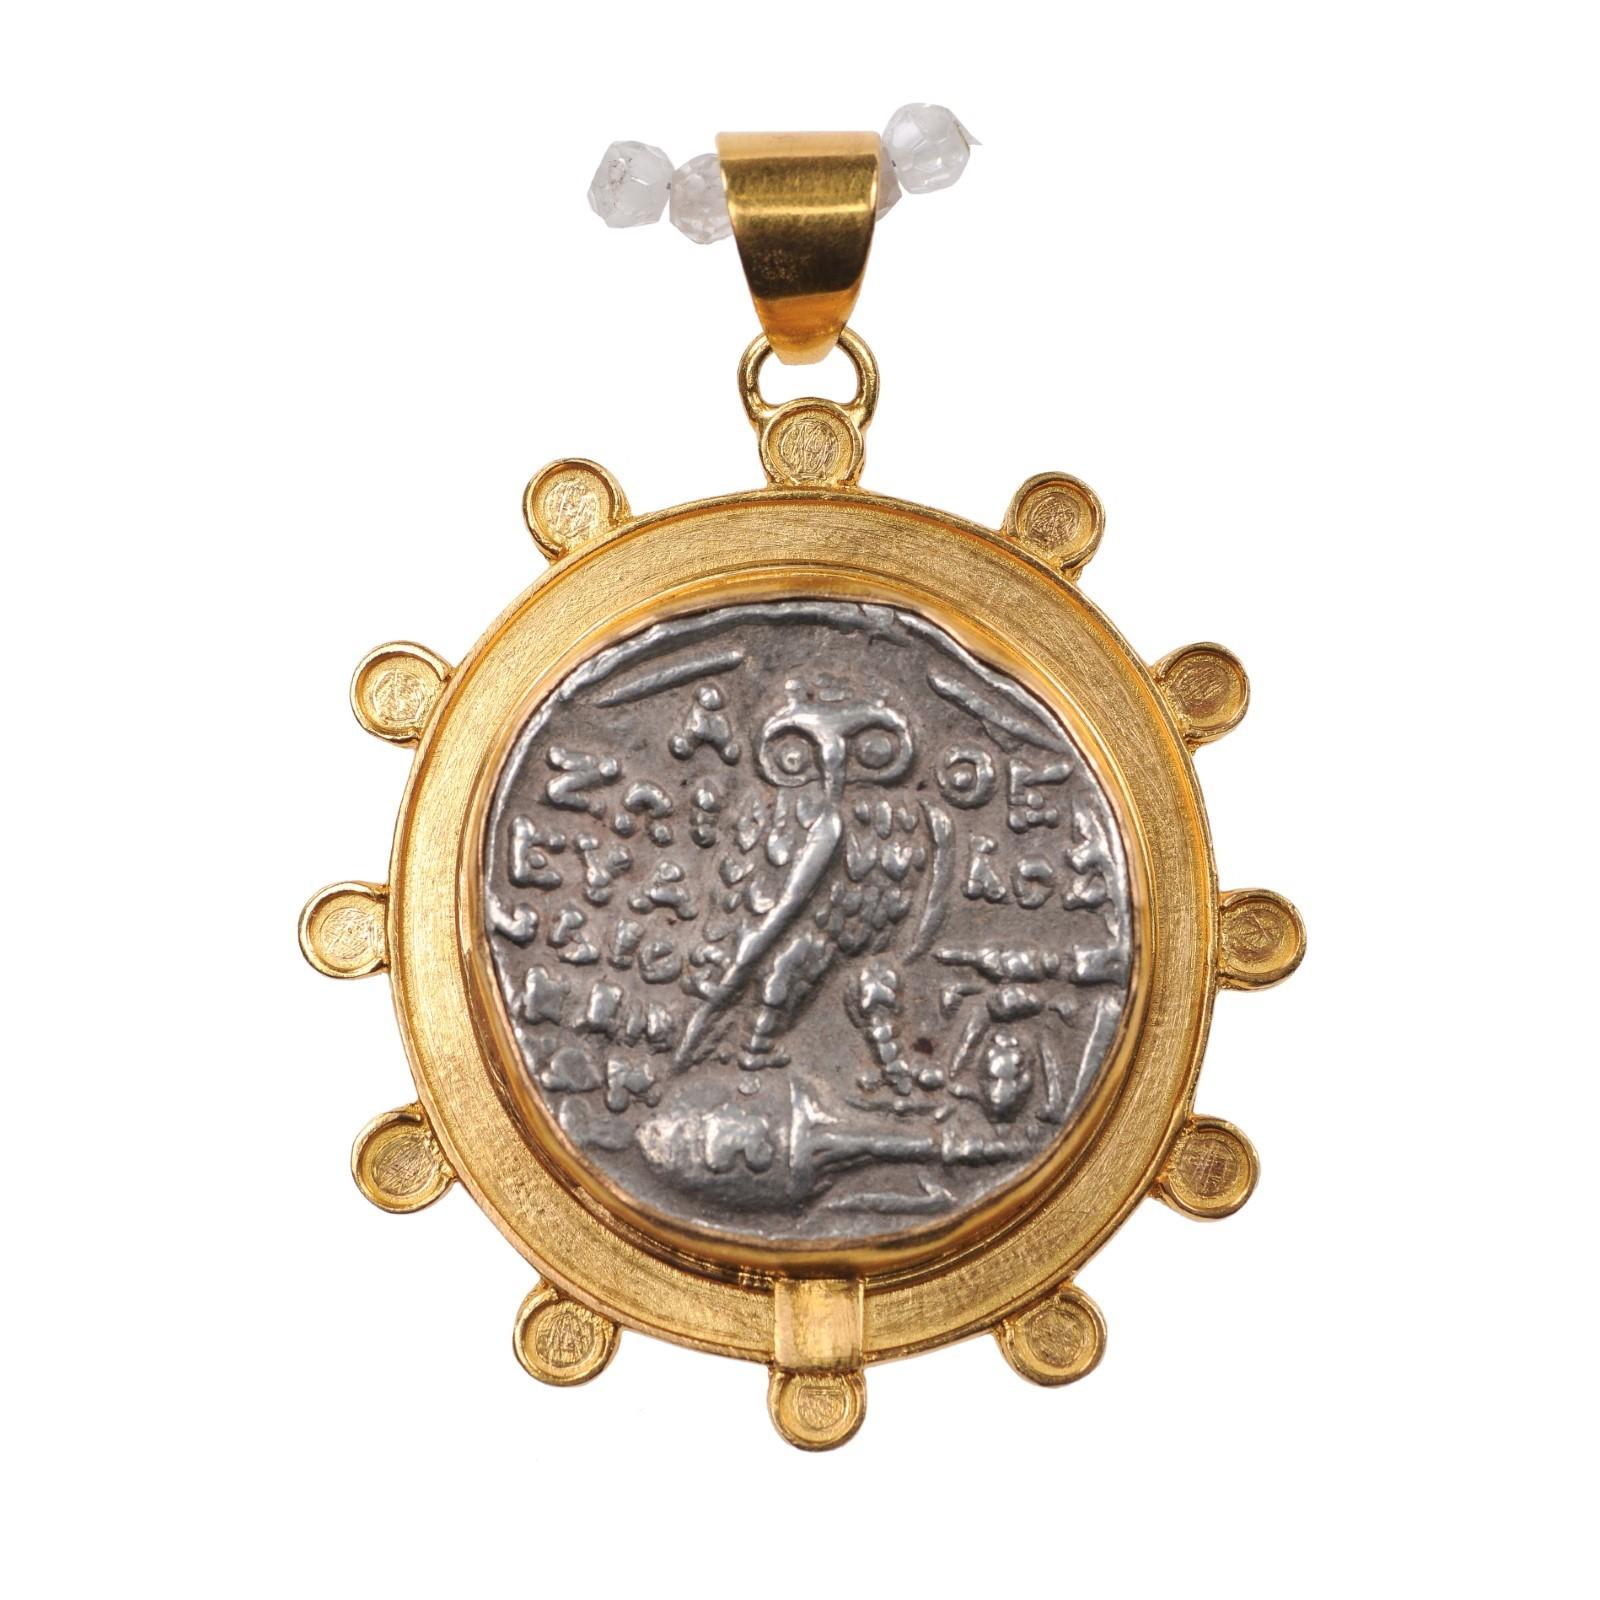 An authentic Greek, Athens silver tetradrachm coin of Athena and Owl (circa 109/108 BC), set in a custom 22-kt gold bezel embellished with round accents about the perimeter, and 22-kt gold bail. The obverse, or front side of this coin features the